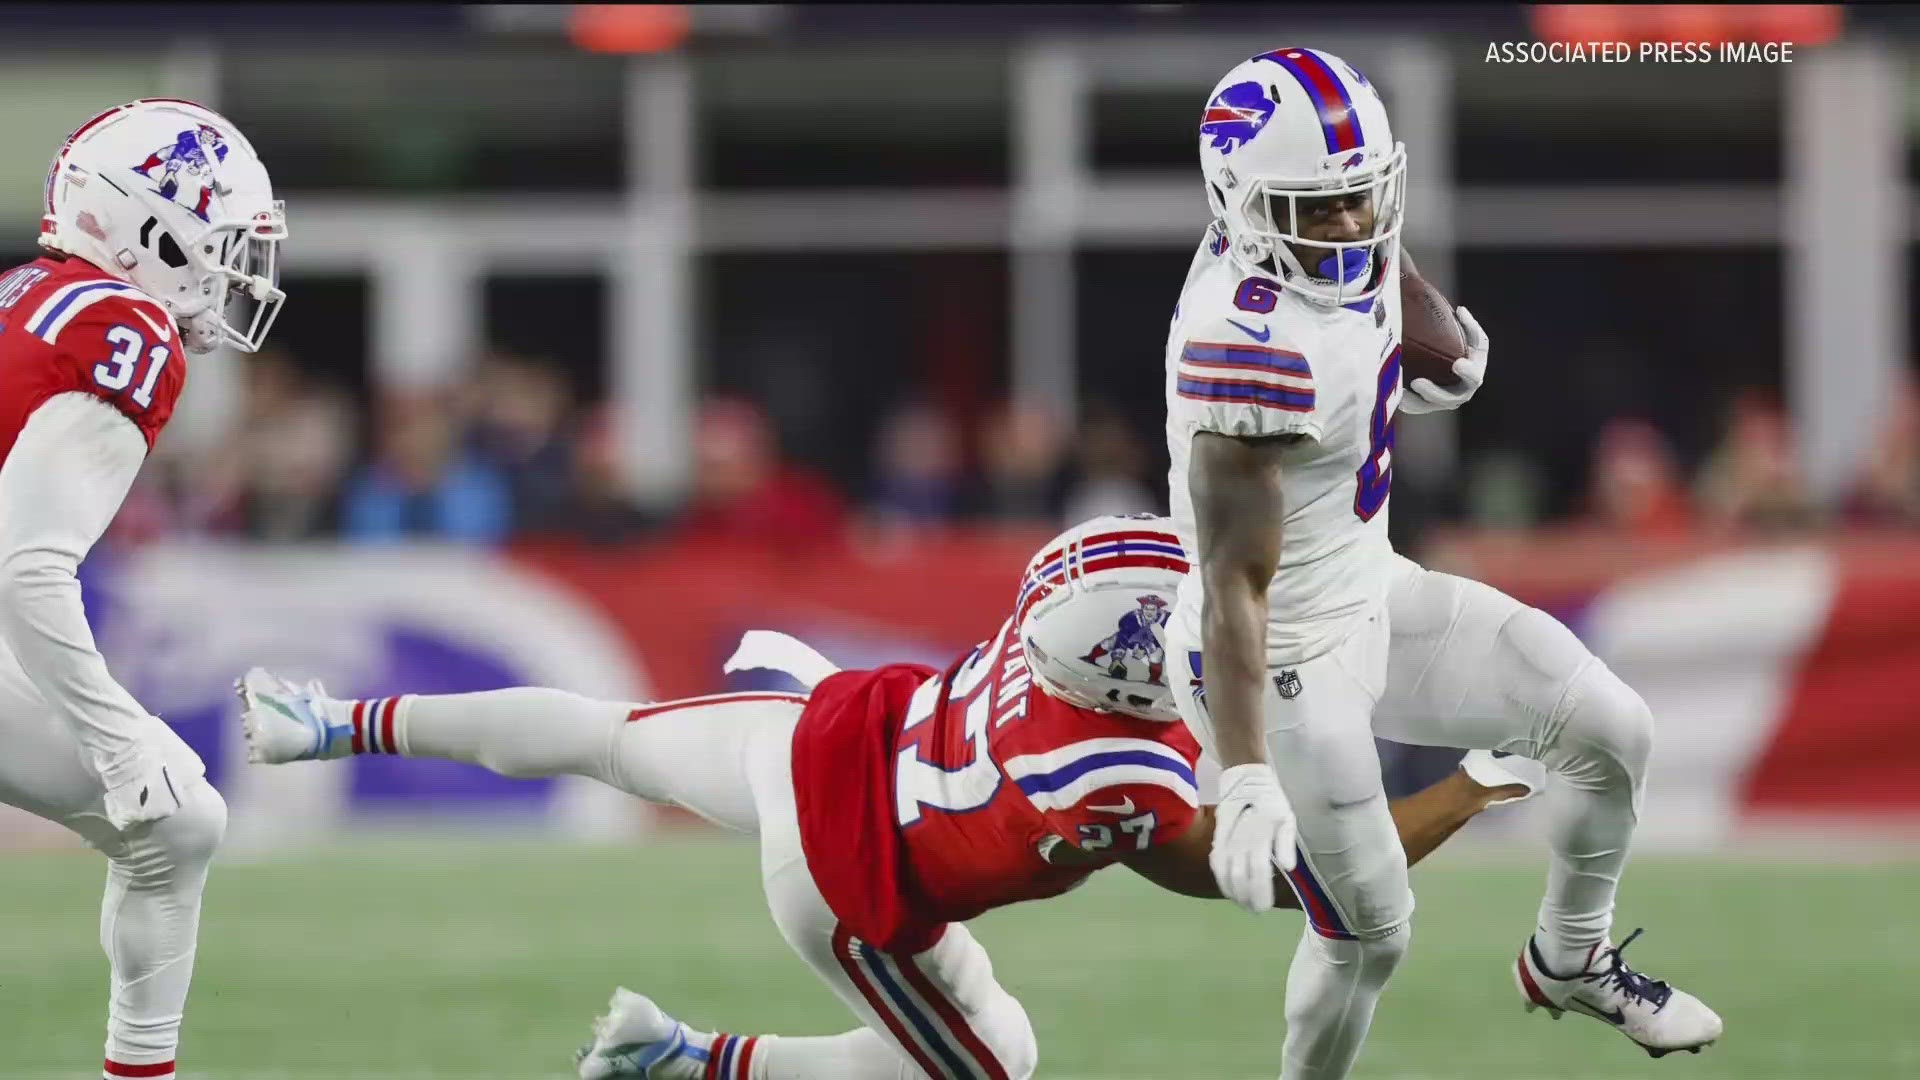 WGRZ Bills/NFL Insider Vic Carucci said he expects the Bills to look for a wide receiver in the upcoming draft, potentially in the 2nd or 3rd round.